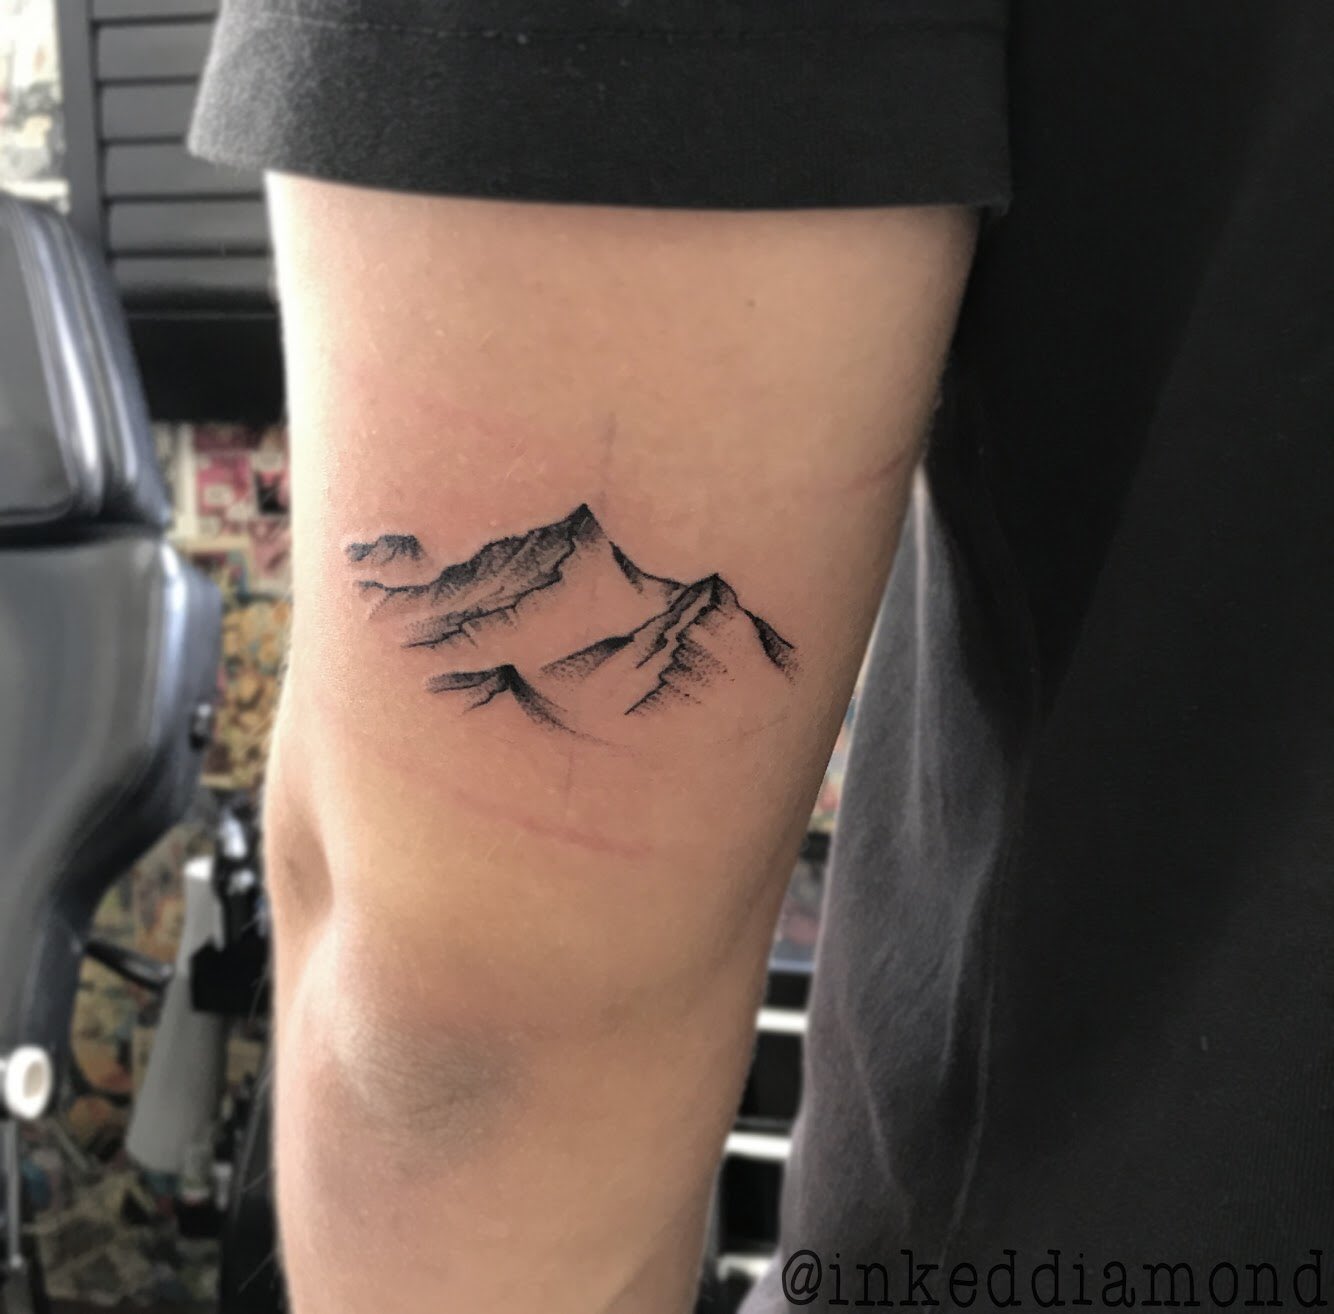 53 Ultimate Amazing Mountain Tattoo Design Ideas for 2019 - Page 13 of 53 -  TattoFit.Com Best Tattoo Blog! | Mountain tattoo simple, Mountain tattoo  design, Mountain tattoo